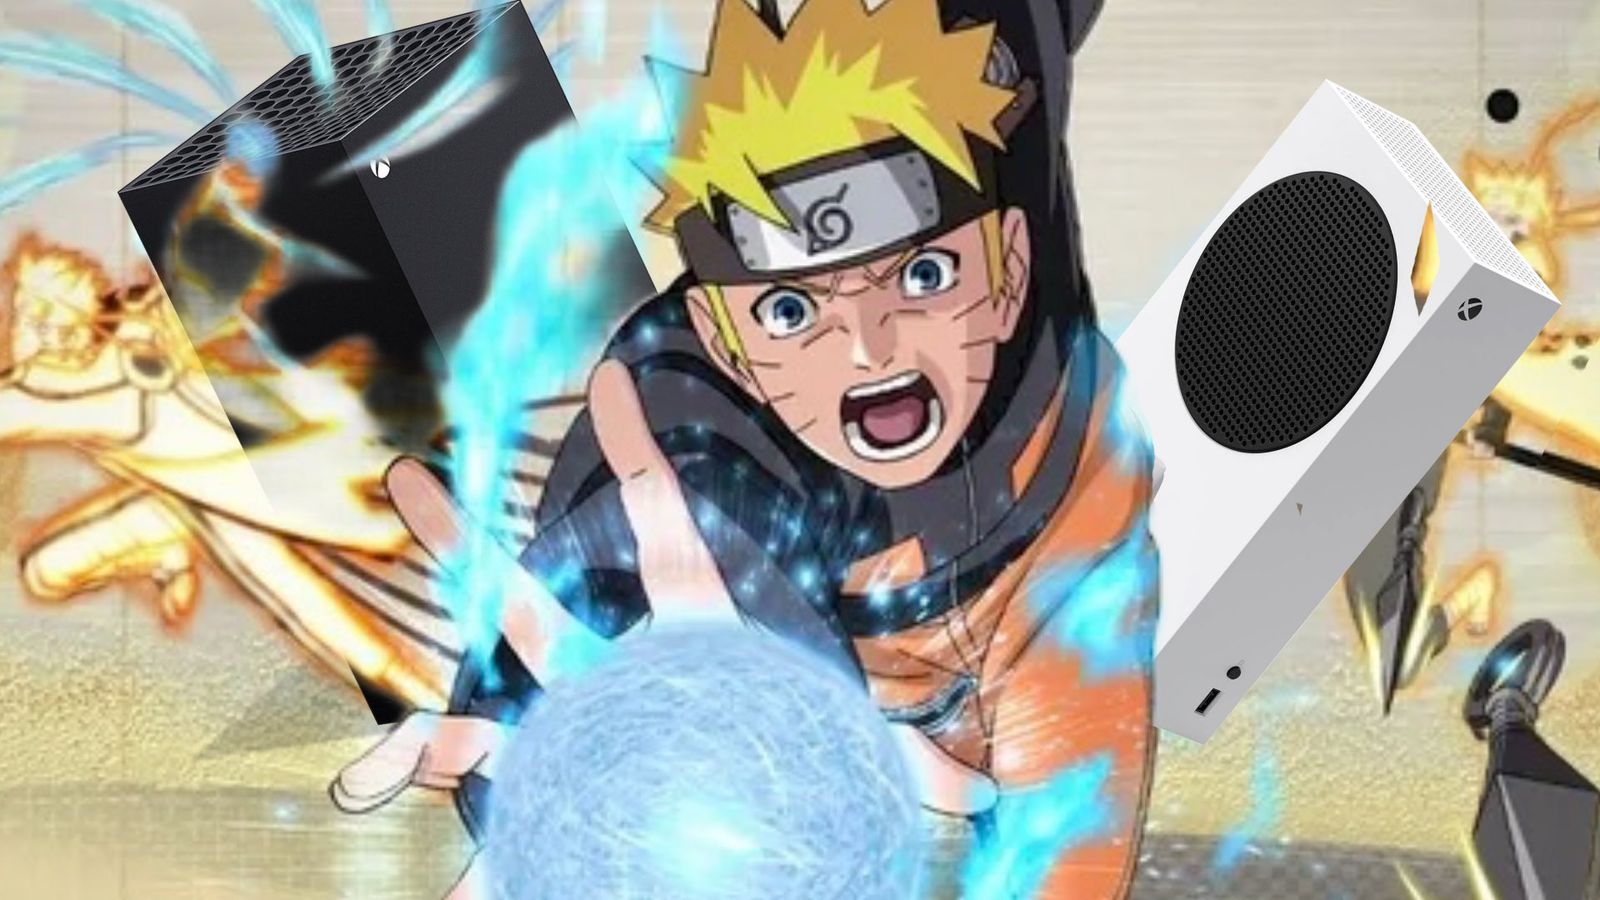 Naruto x Boruto lets Xbox Series X players ban matches with Series S users  